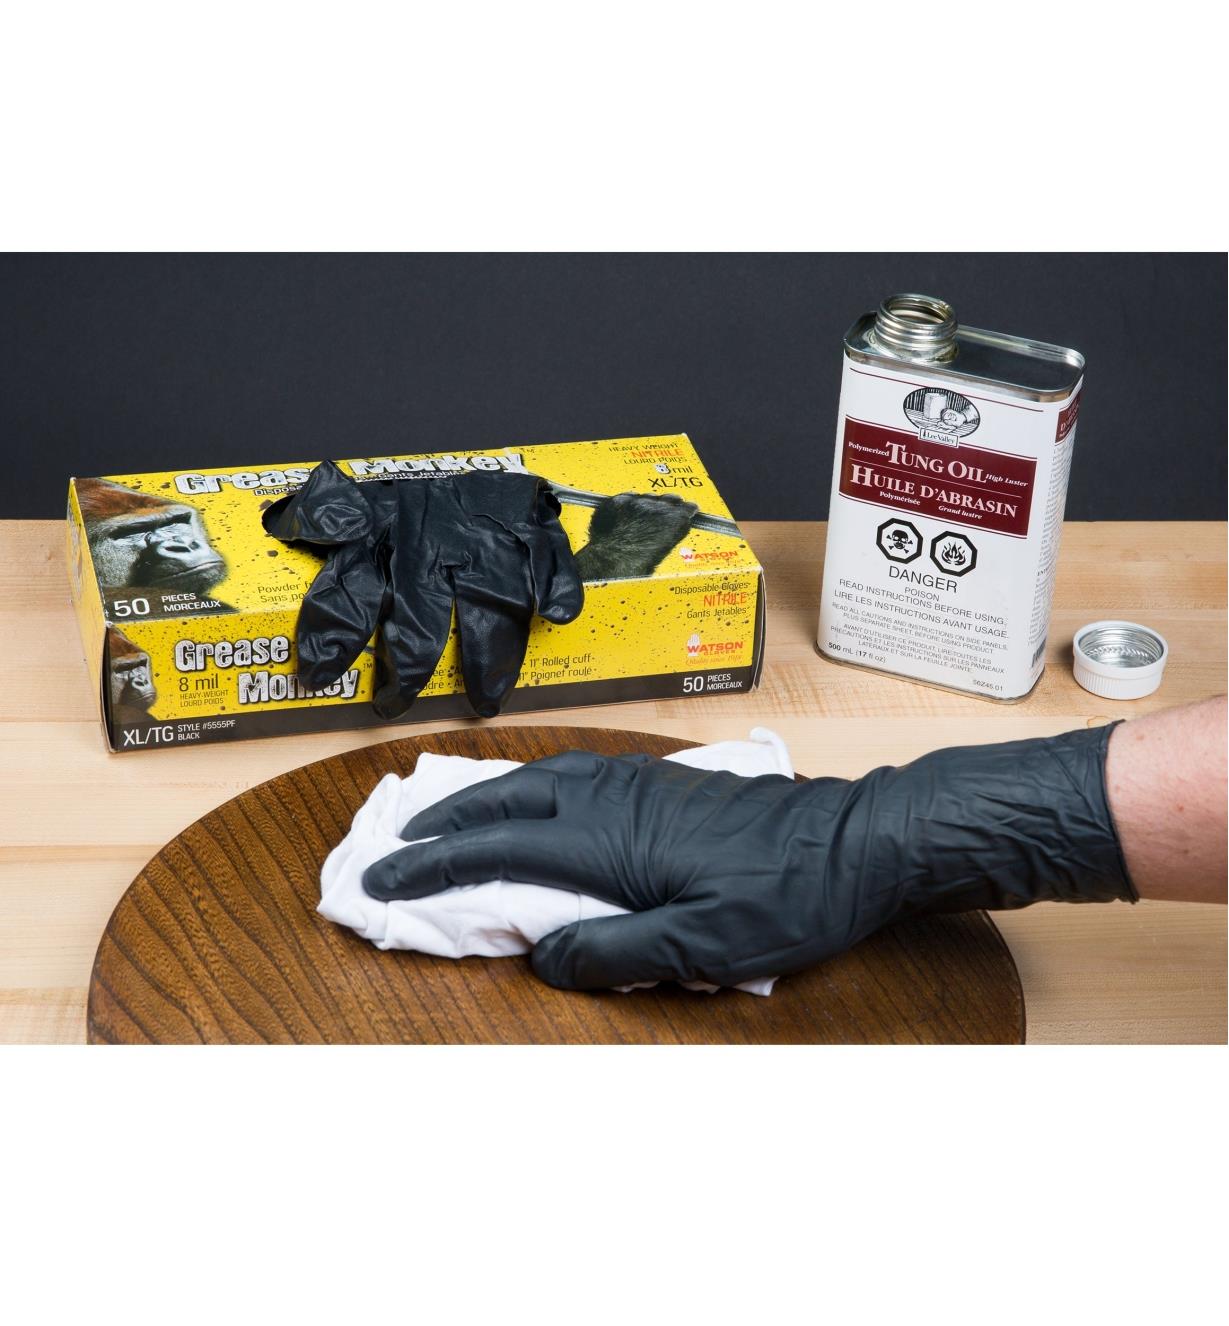 Wearing Grease Monkey Nitrile Gloves while applying tung oil to wood